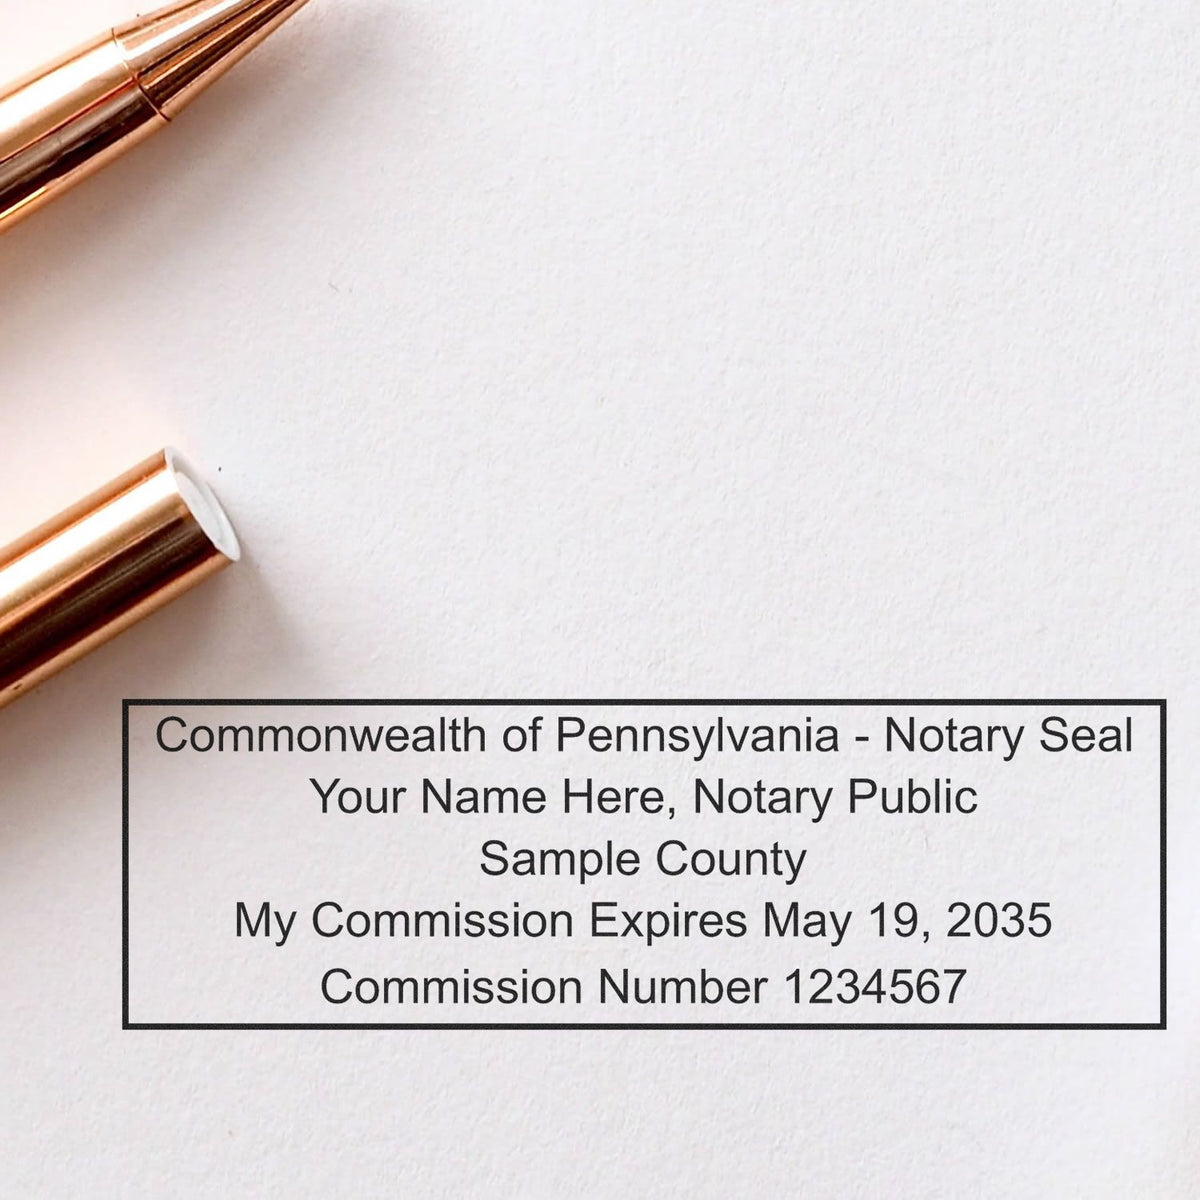 An alternative view of the PSI Pennsylvania Notary Stamp stamped on a sheet of paper showing the image in use